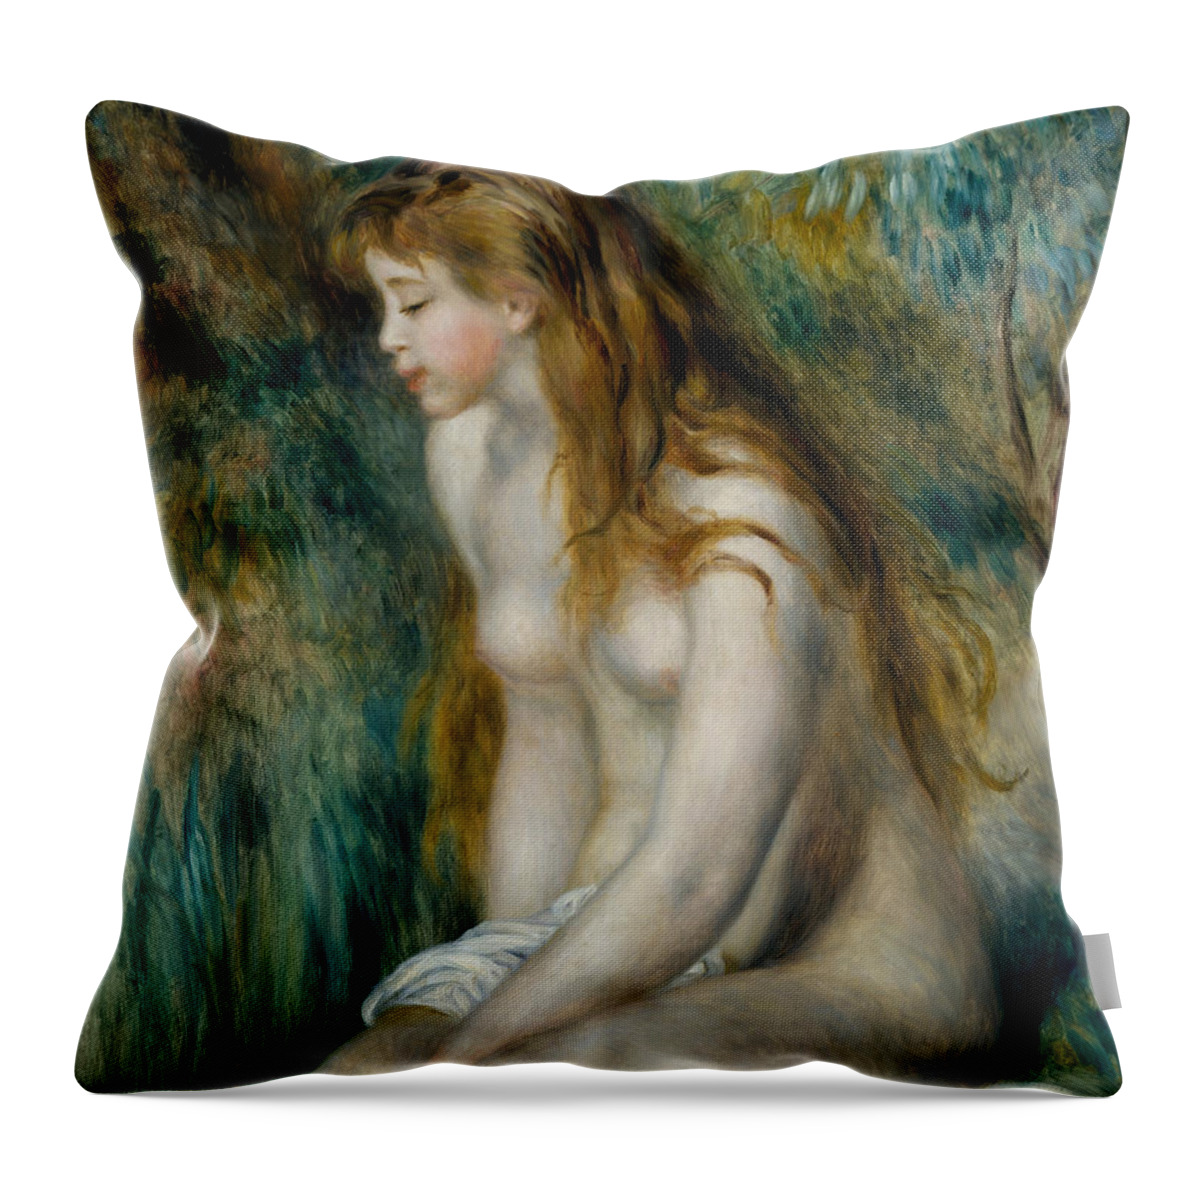 19th Century Art Throw Pillow featuring the painting Young Girl Bathing by Auguste Renoir